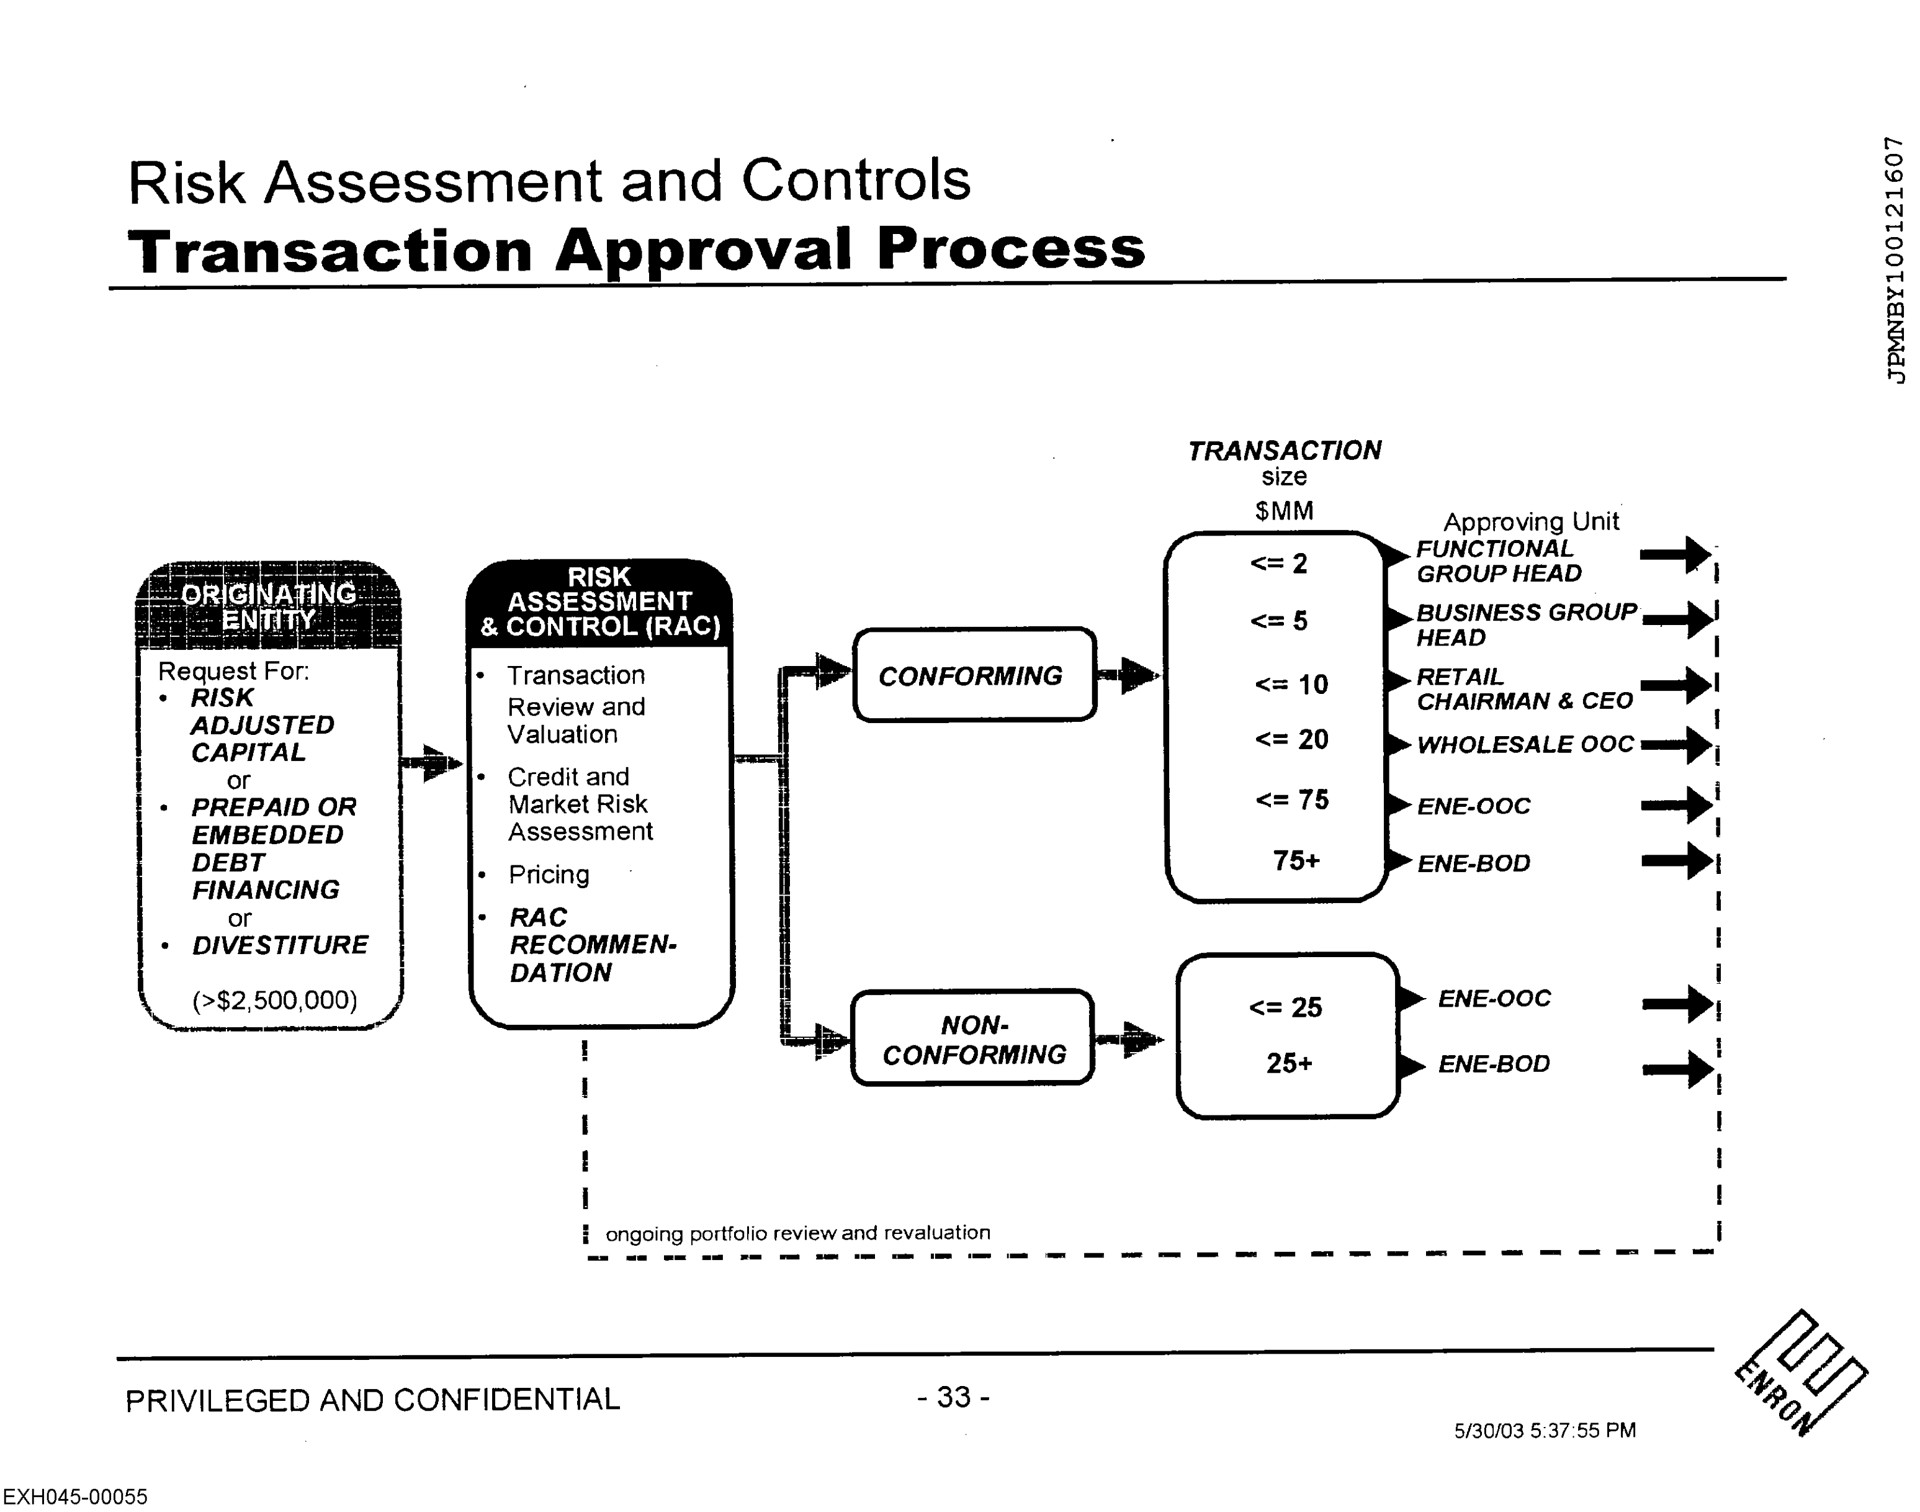 risk assessment and controls transaction approval process | Enron